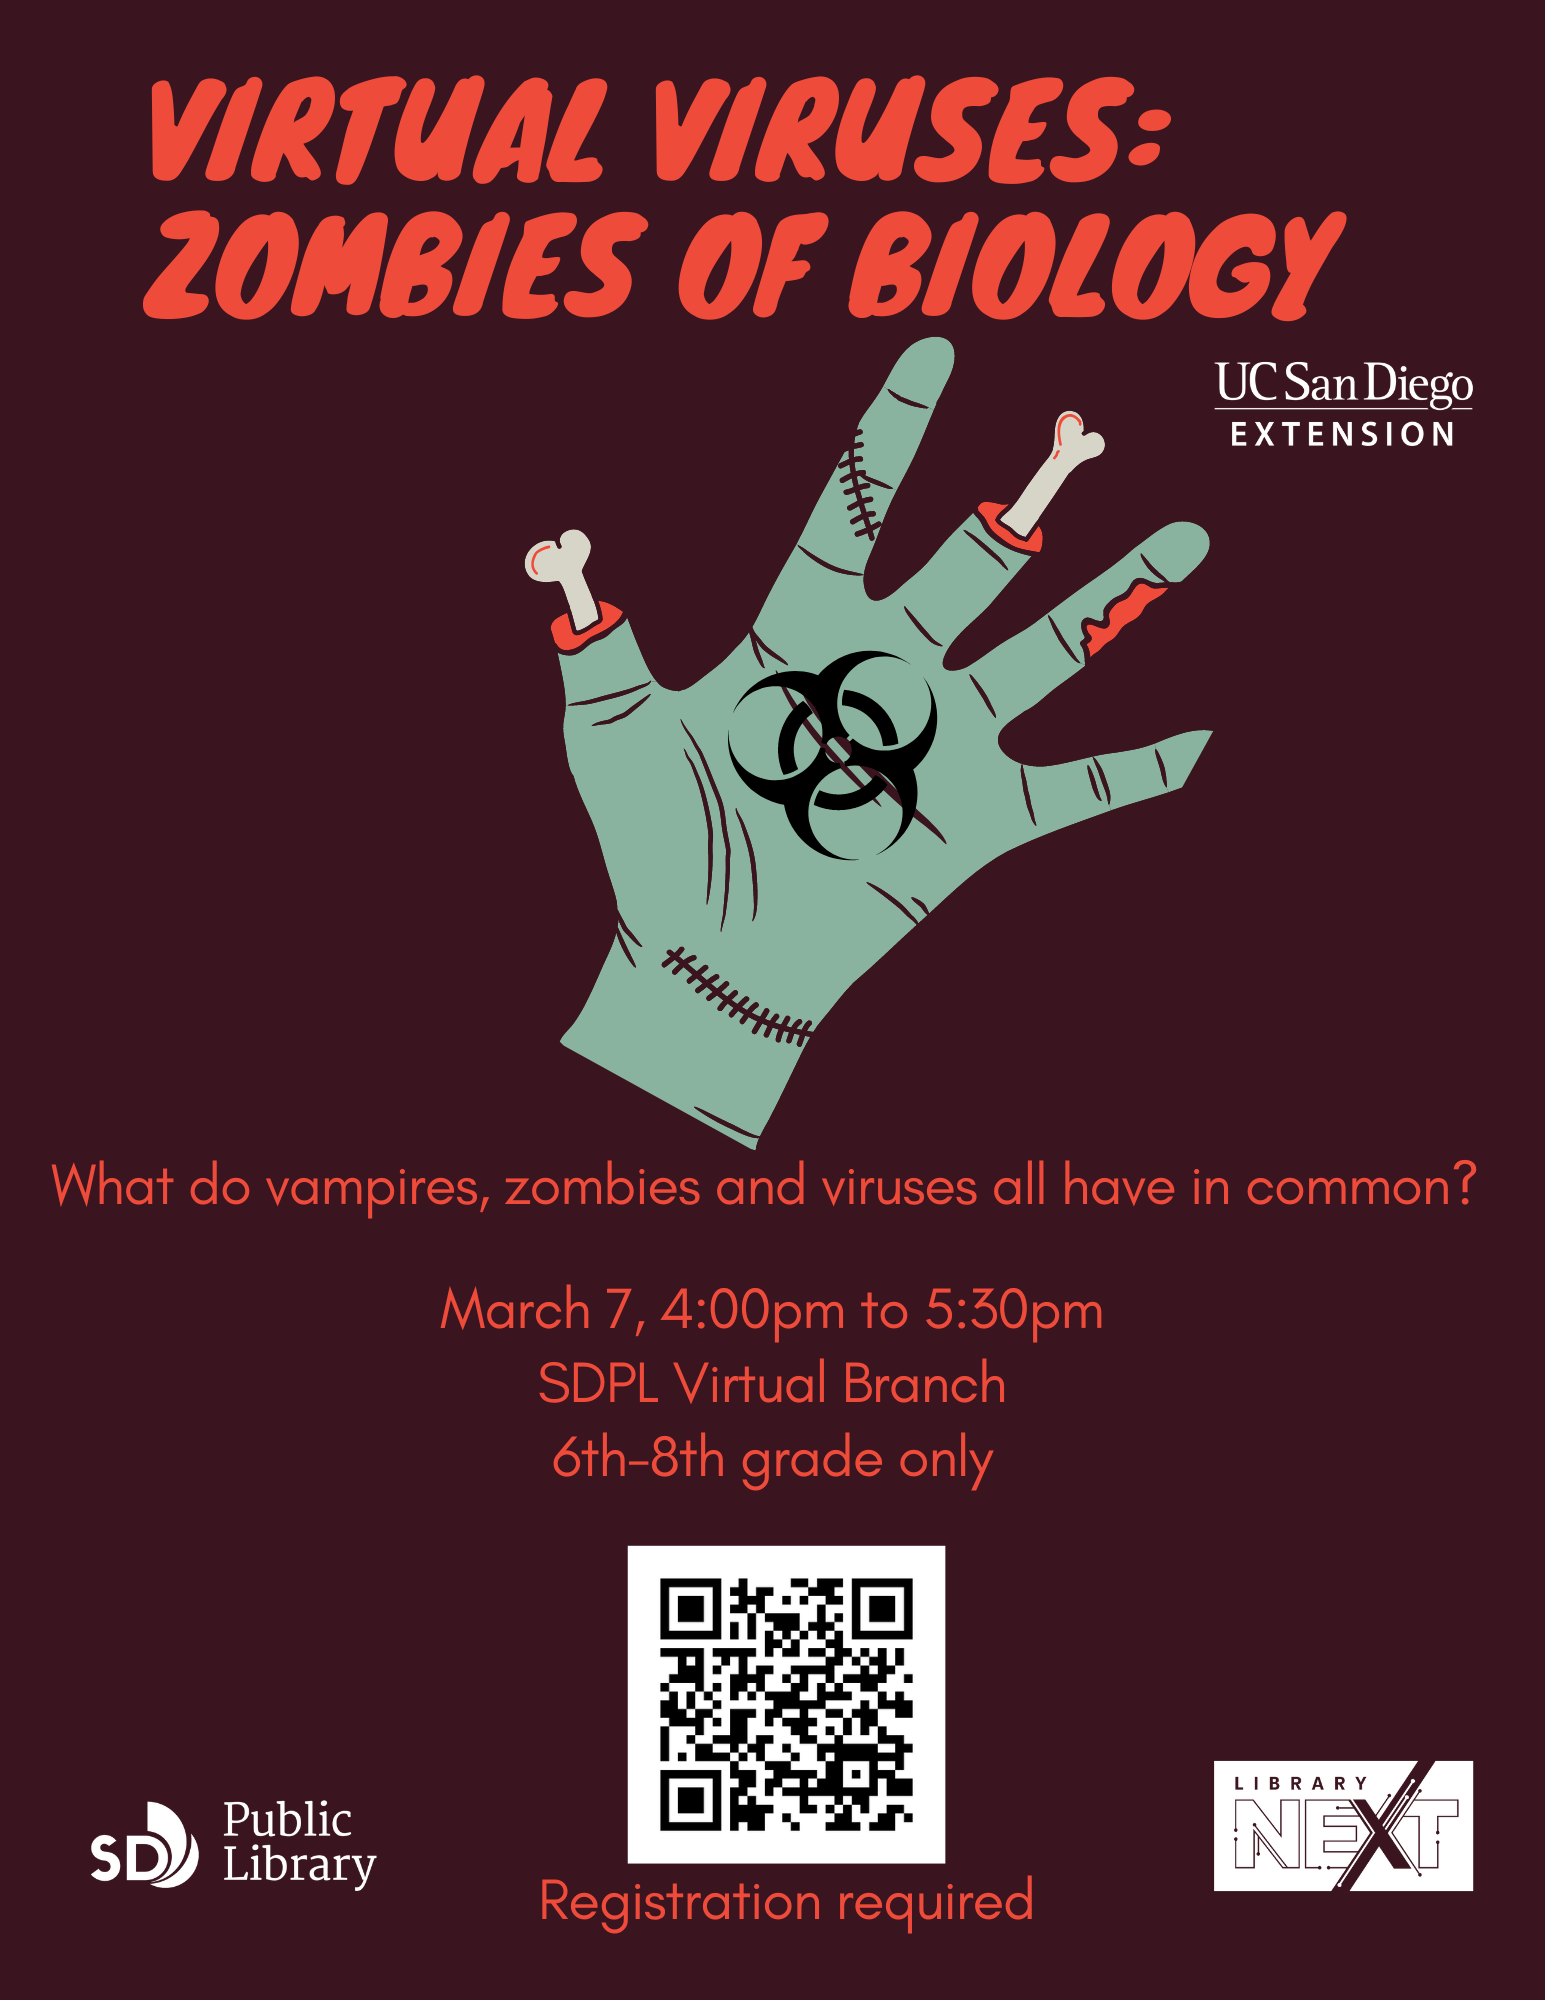 Virtual Viruses: Zombies of Biology. What do vampires, zombies and viruses all have in common? March 7, 4pm-5pm. SDPL Virtual Branch. 6th-8th grade only. Registration required.